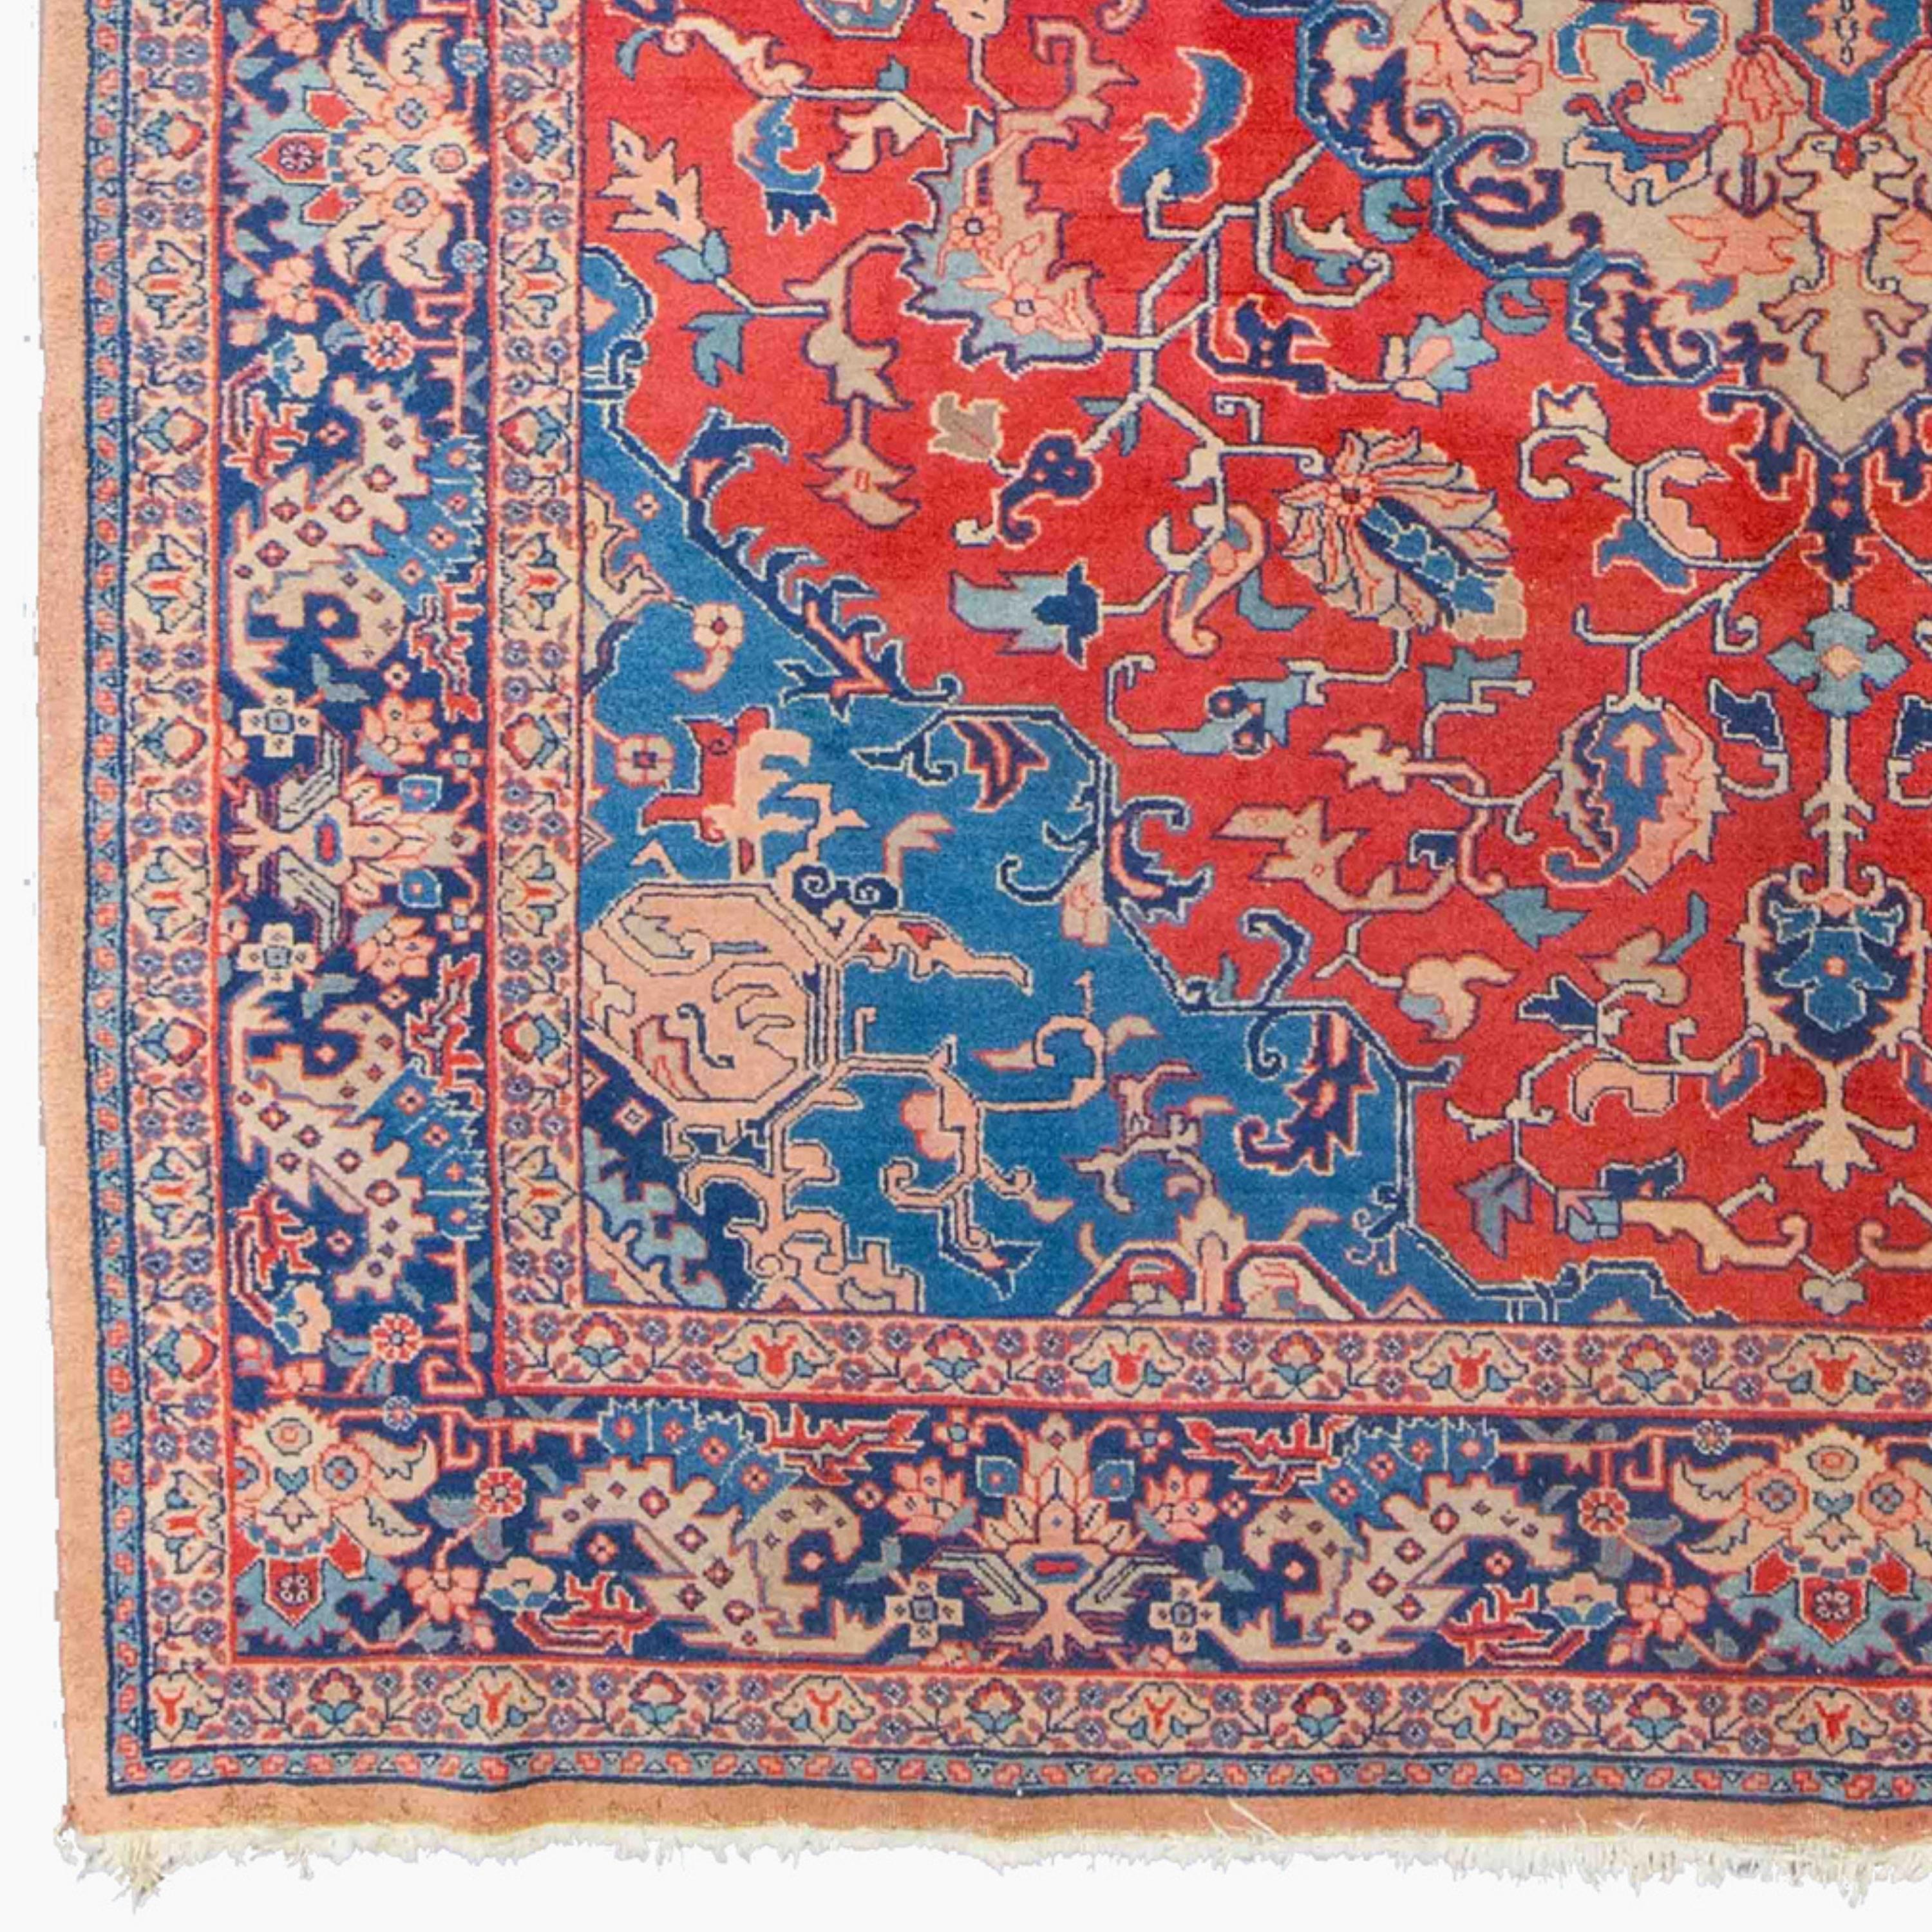 Antique Tabriz Rug 244x334 ft (8 x 10,95 ft) Late of 19th Century Tebriz Rug in Good Condition

From the mid-19th century, there was a revival in commercial carpet production in Azerbaijan, and Tabriz became one of the country's most important